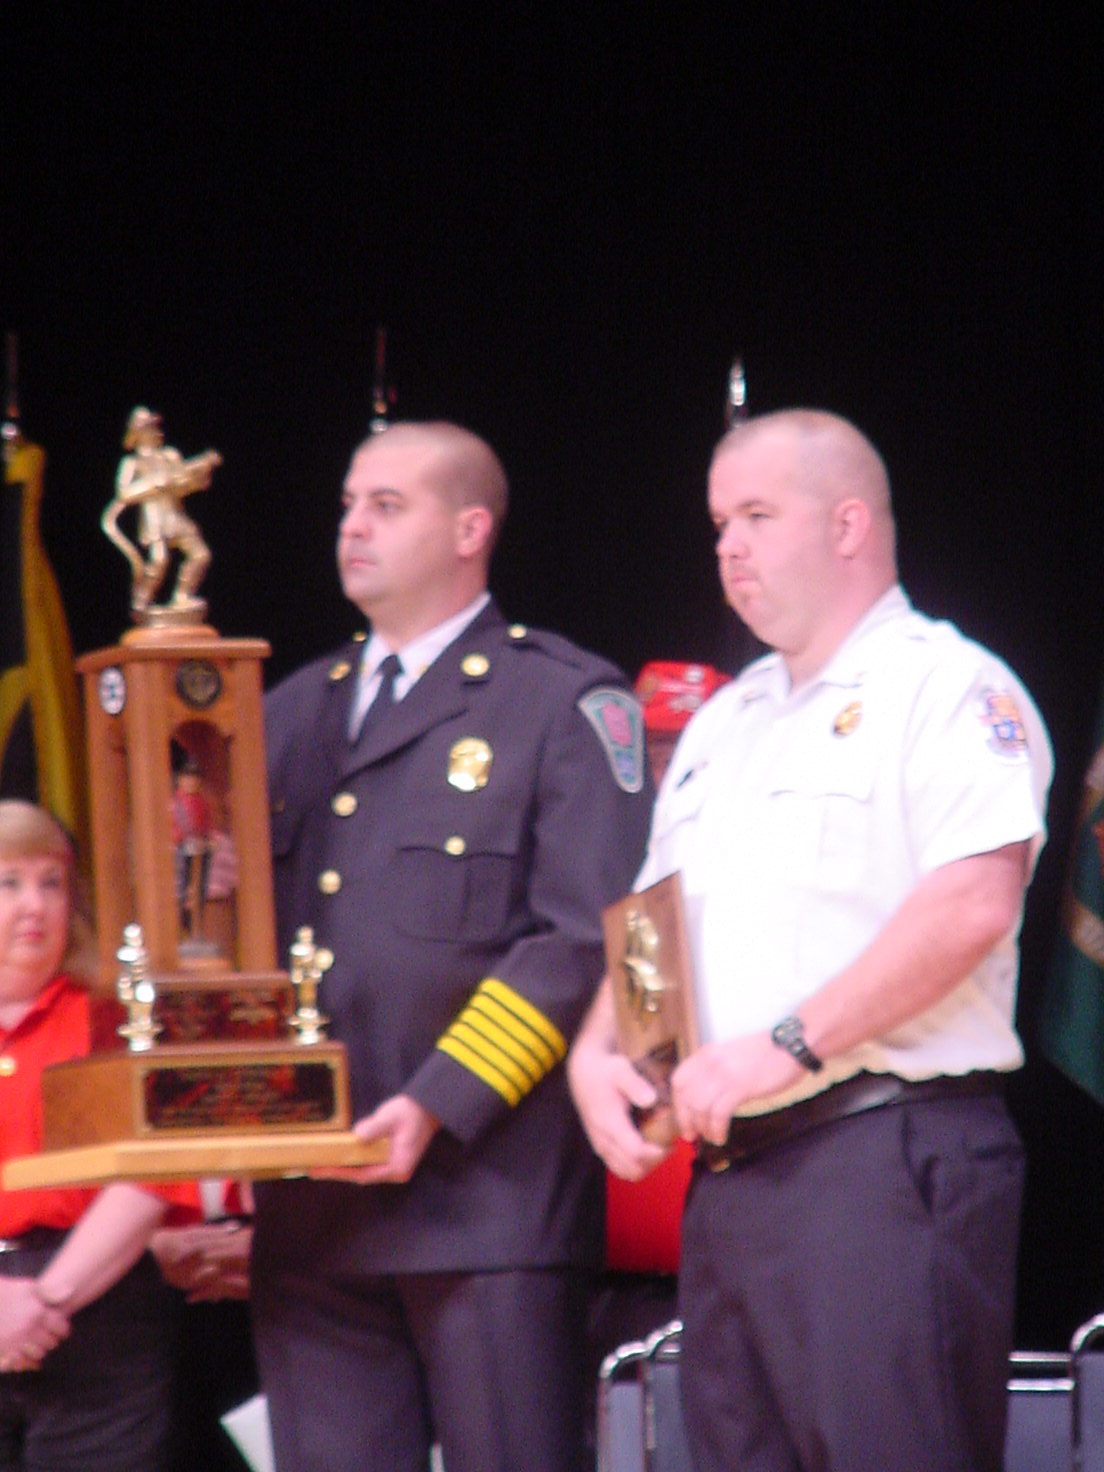 MSFA Convention 2003 - John Weaver Safety Officer